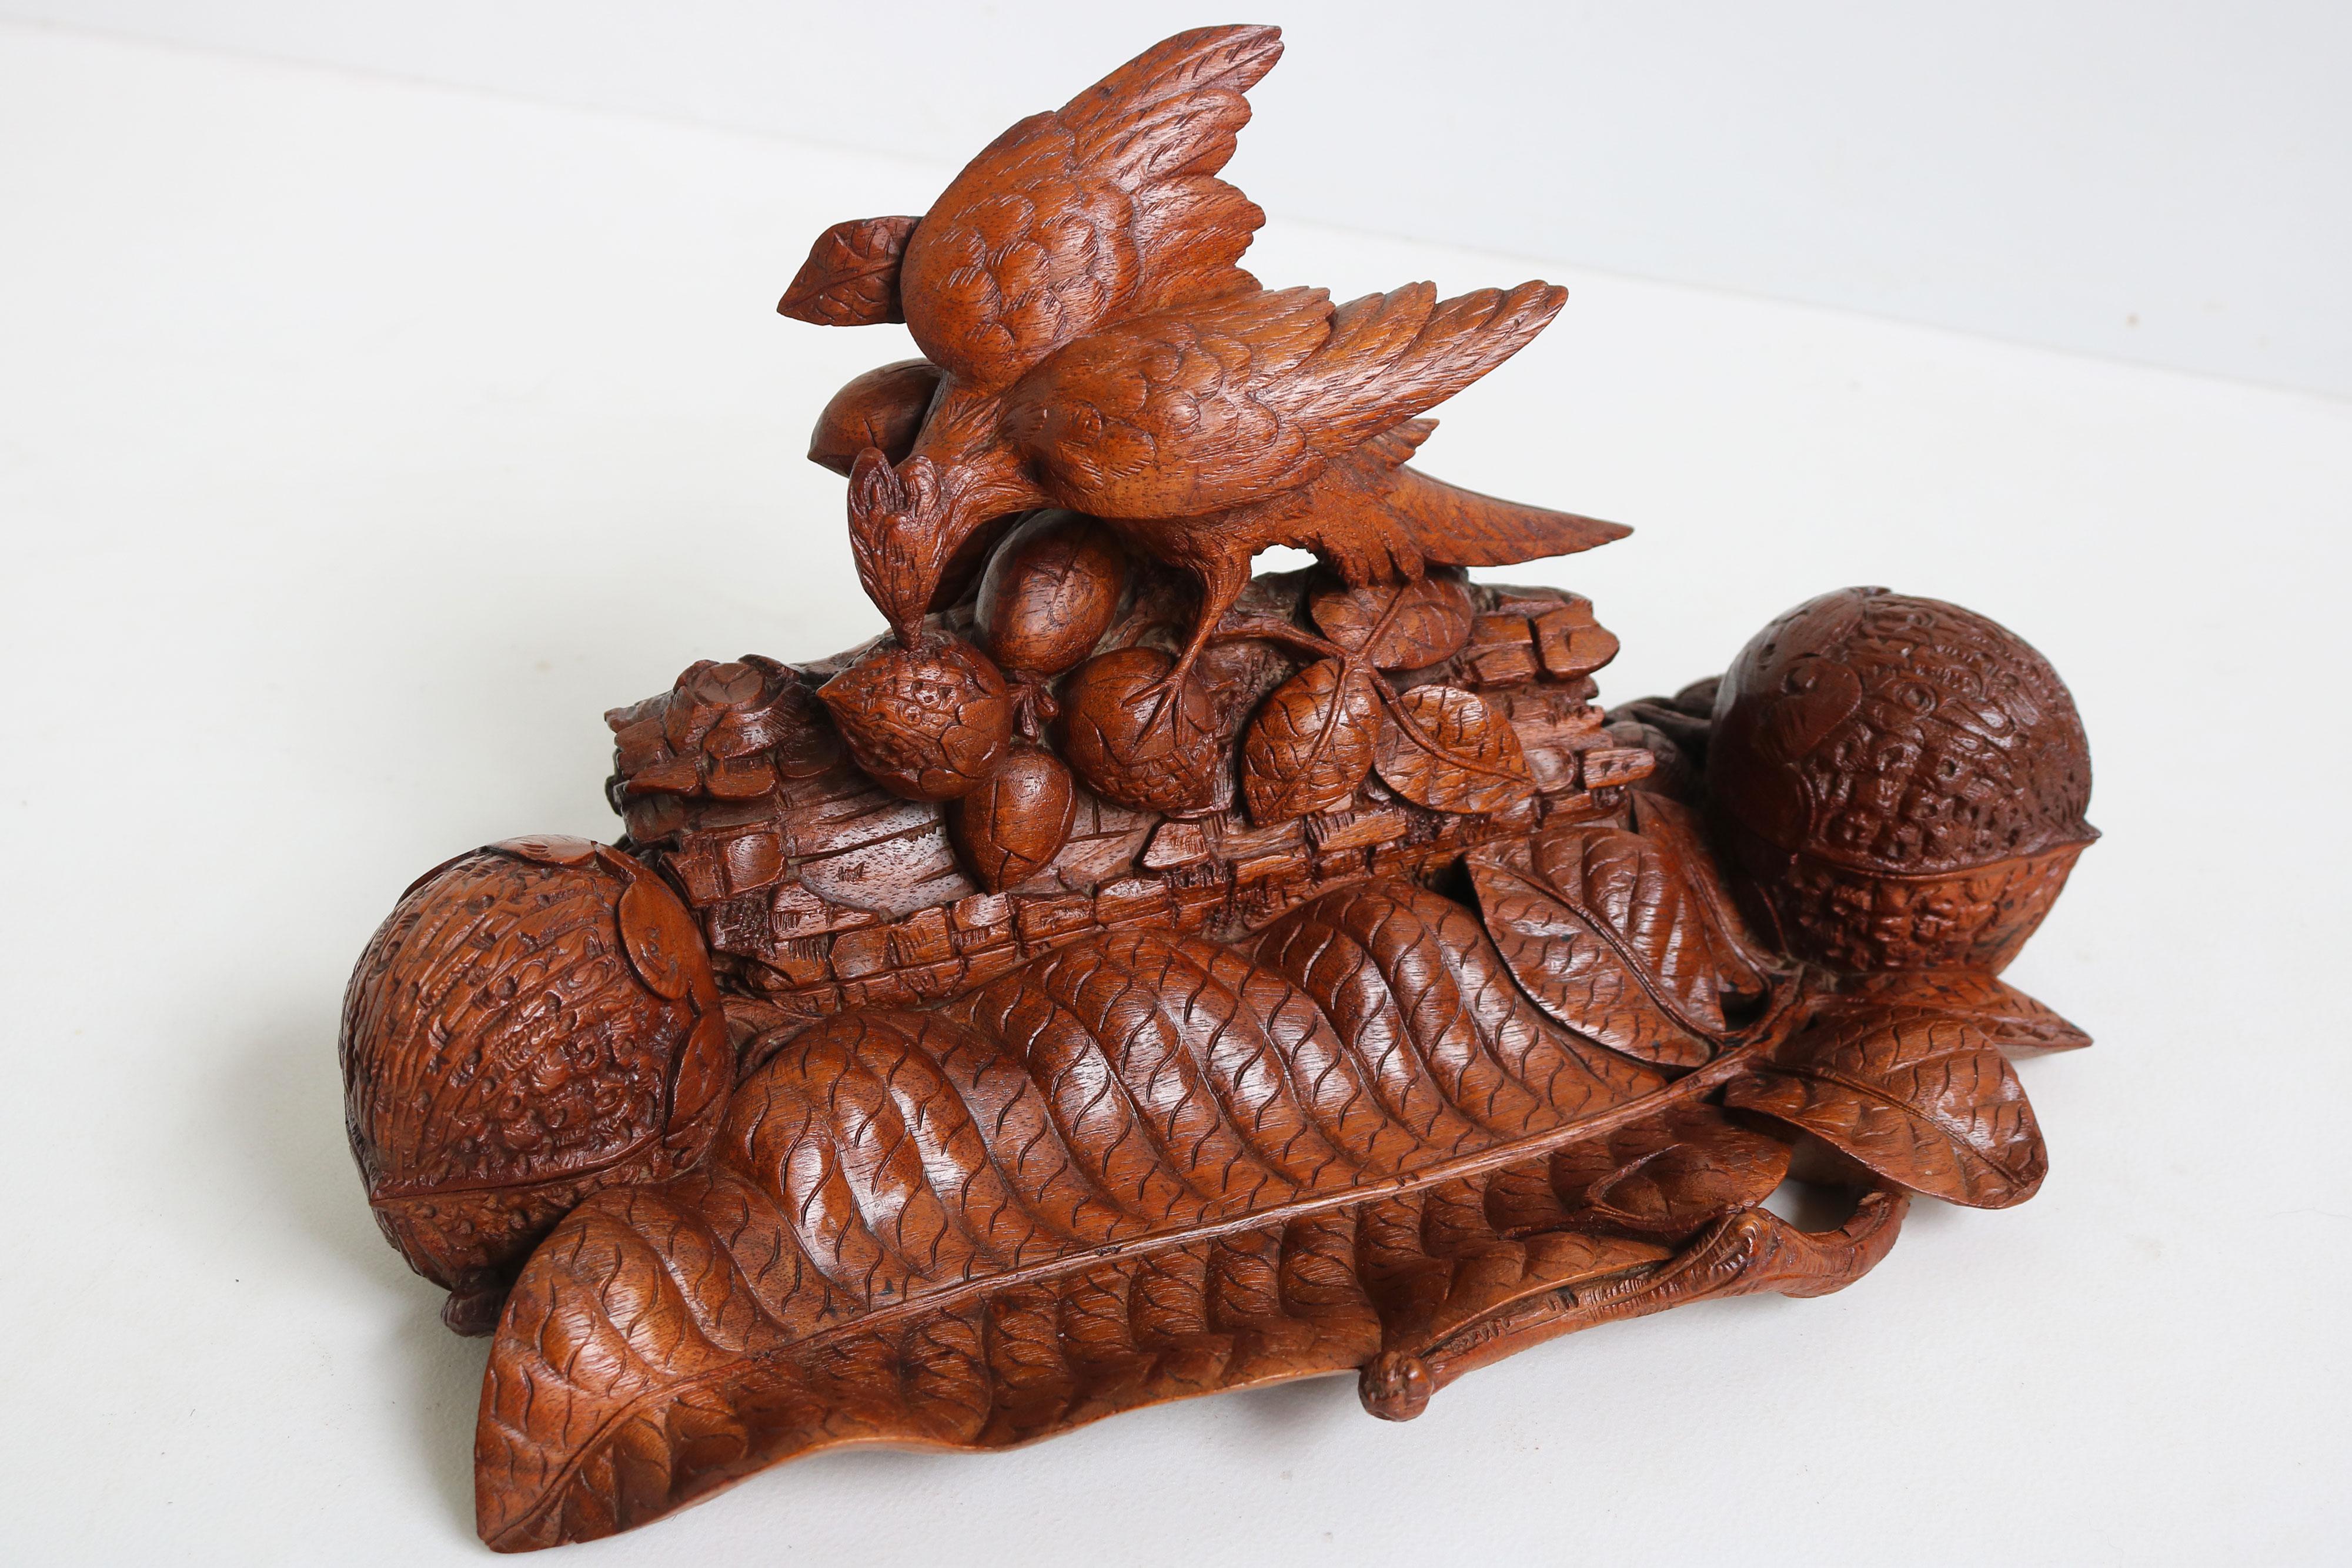 Gorgeous most rare Swiss Black Forest 19th century double Inkwell / desk accessory fully hand carved displaying a bird eating nuts & floral leaves / walnuts.
Carved by a master carver with most impression attention to detail. Please take your time